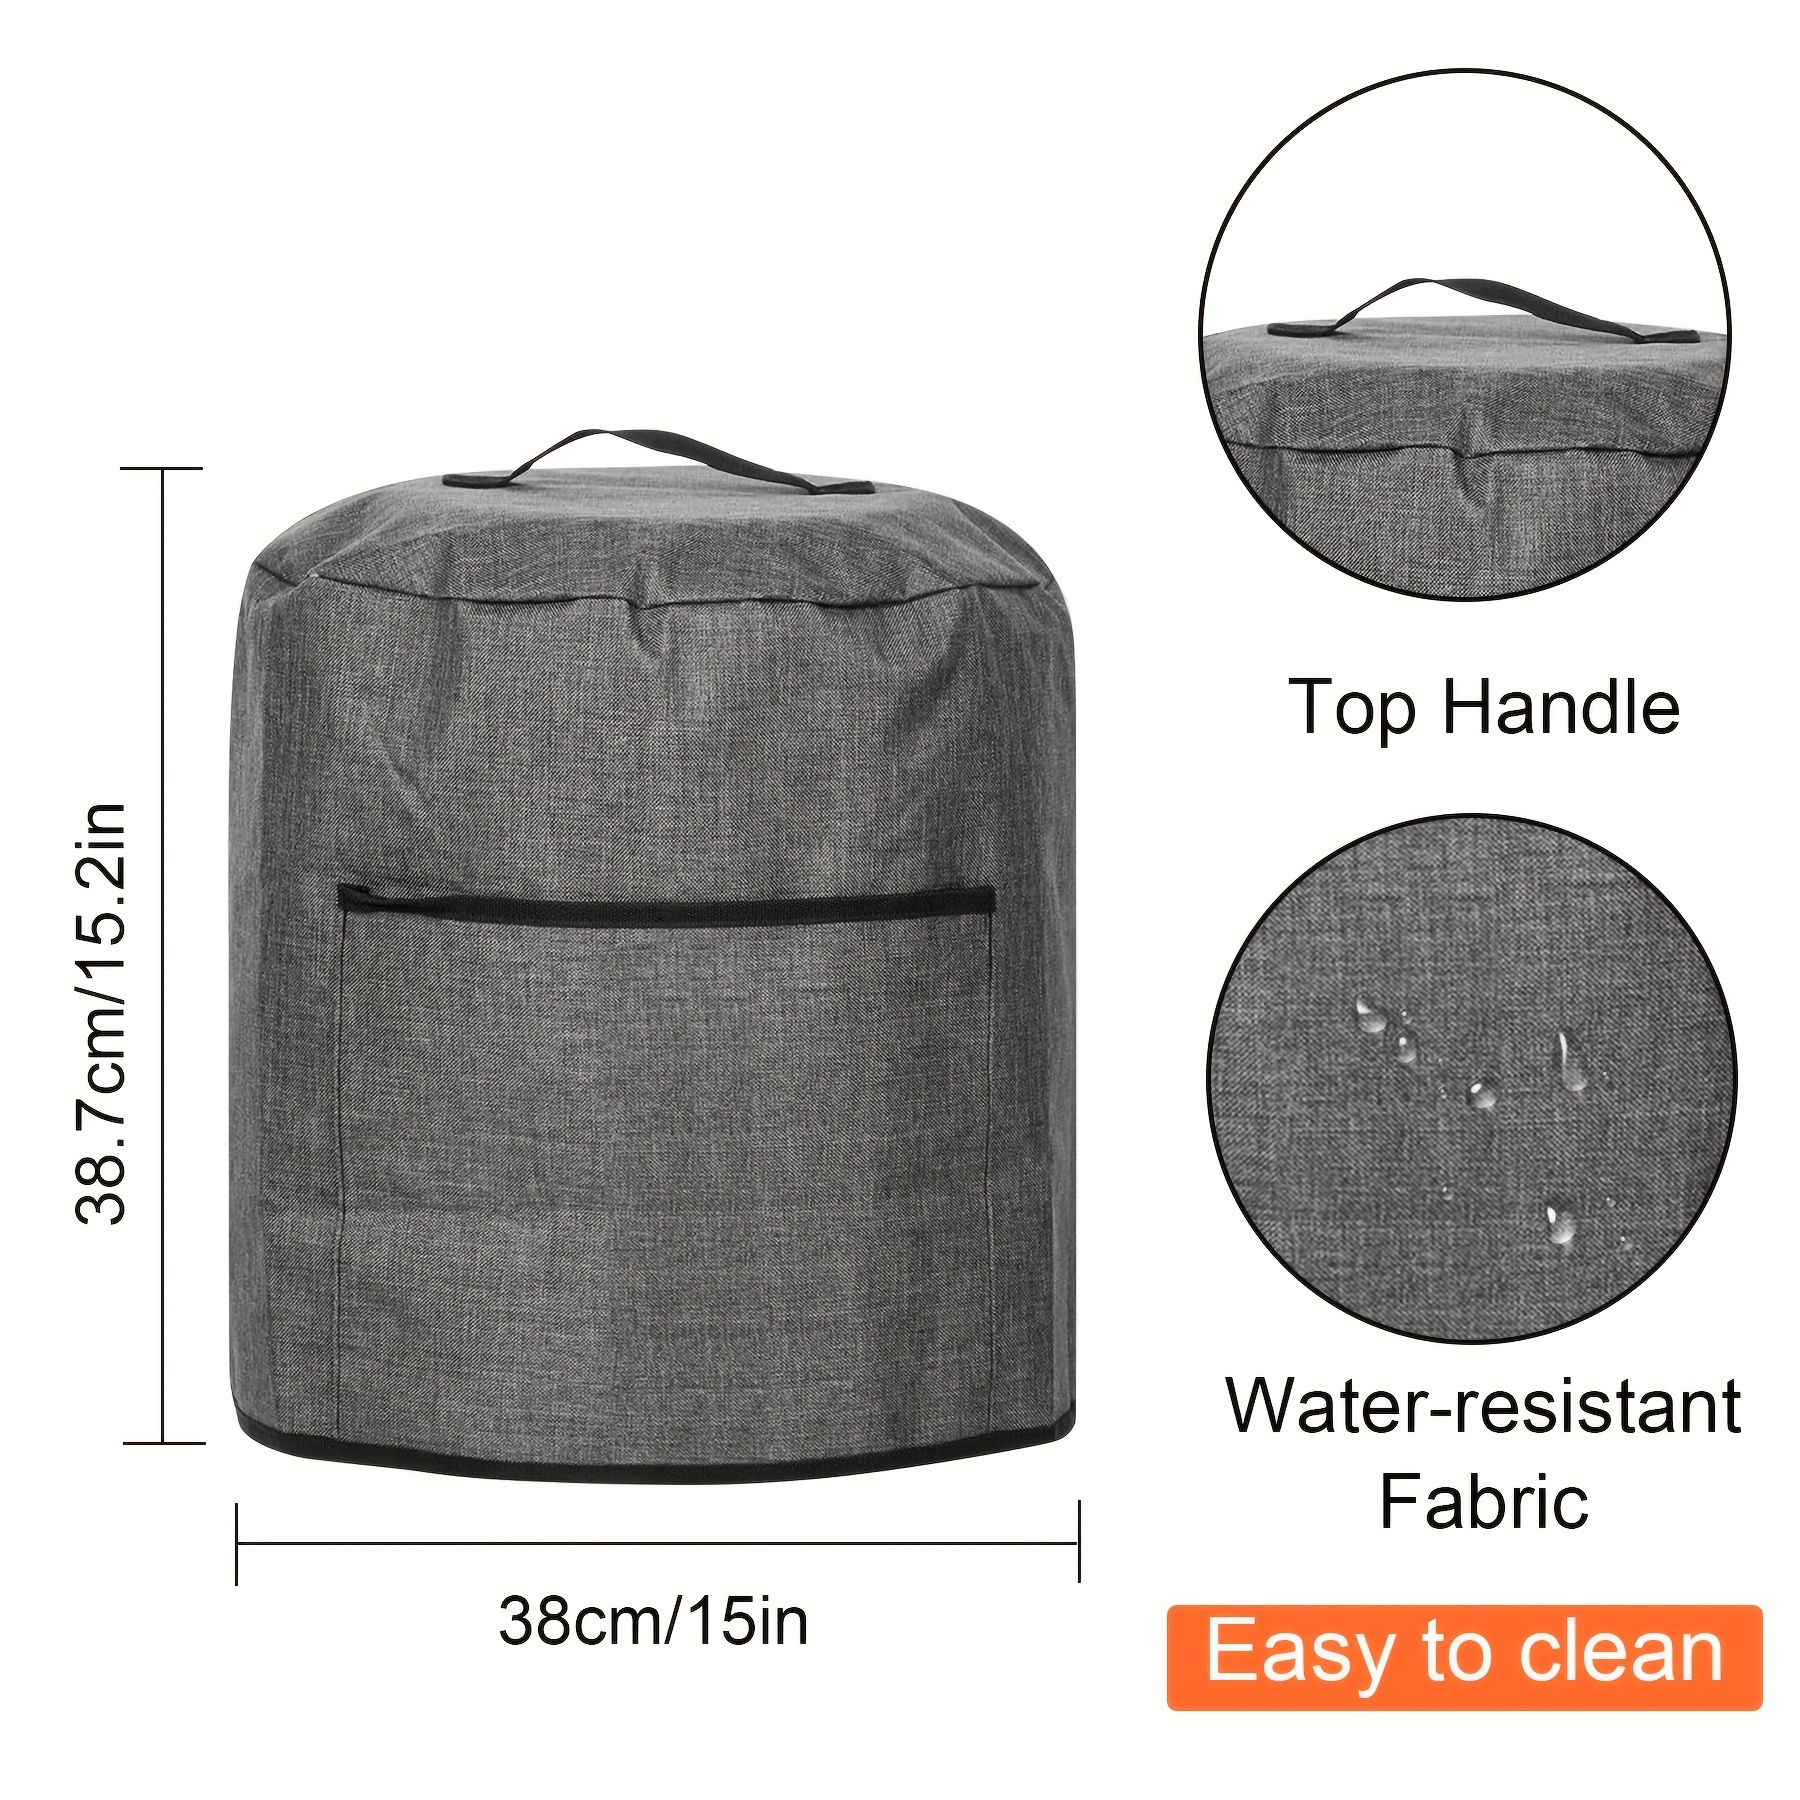 Air Fryer Dust Cover Storage Cover with Pocket Easy Cleaning Durable Appliance Cover Multifunction for Restaurant Rice Cooker Cooking Travel 6 Quart